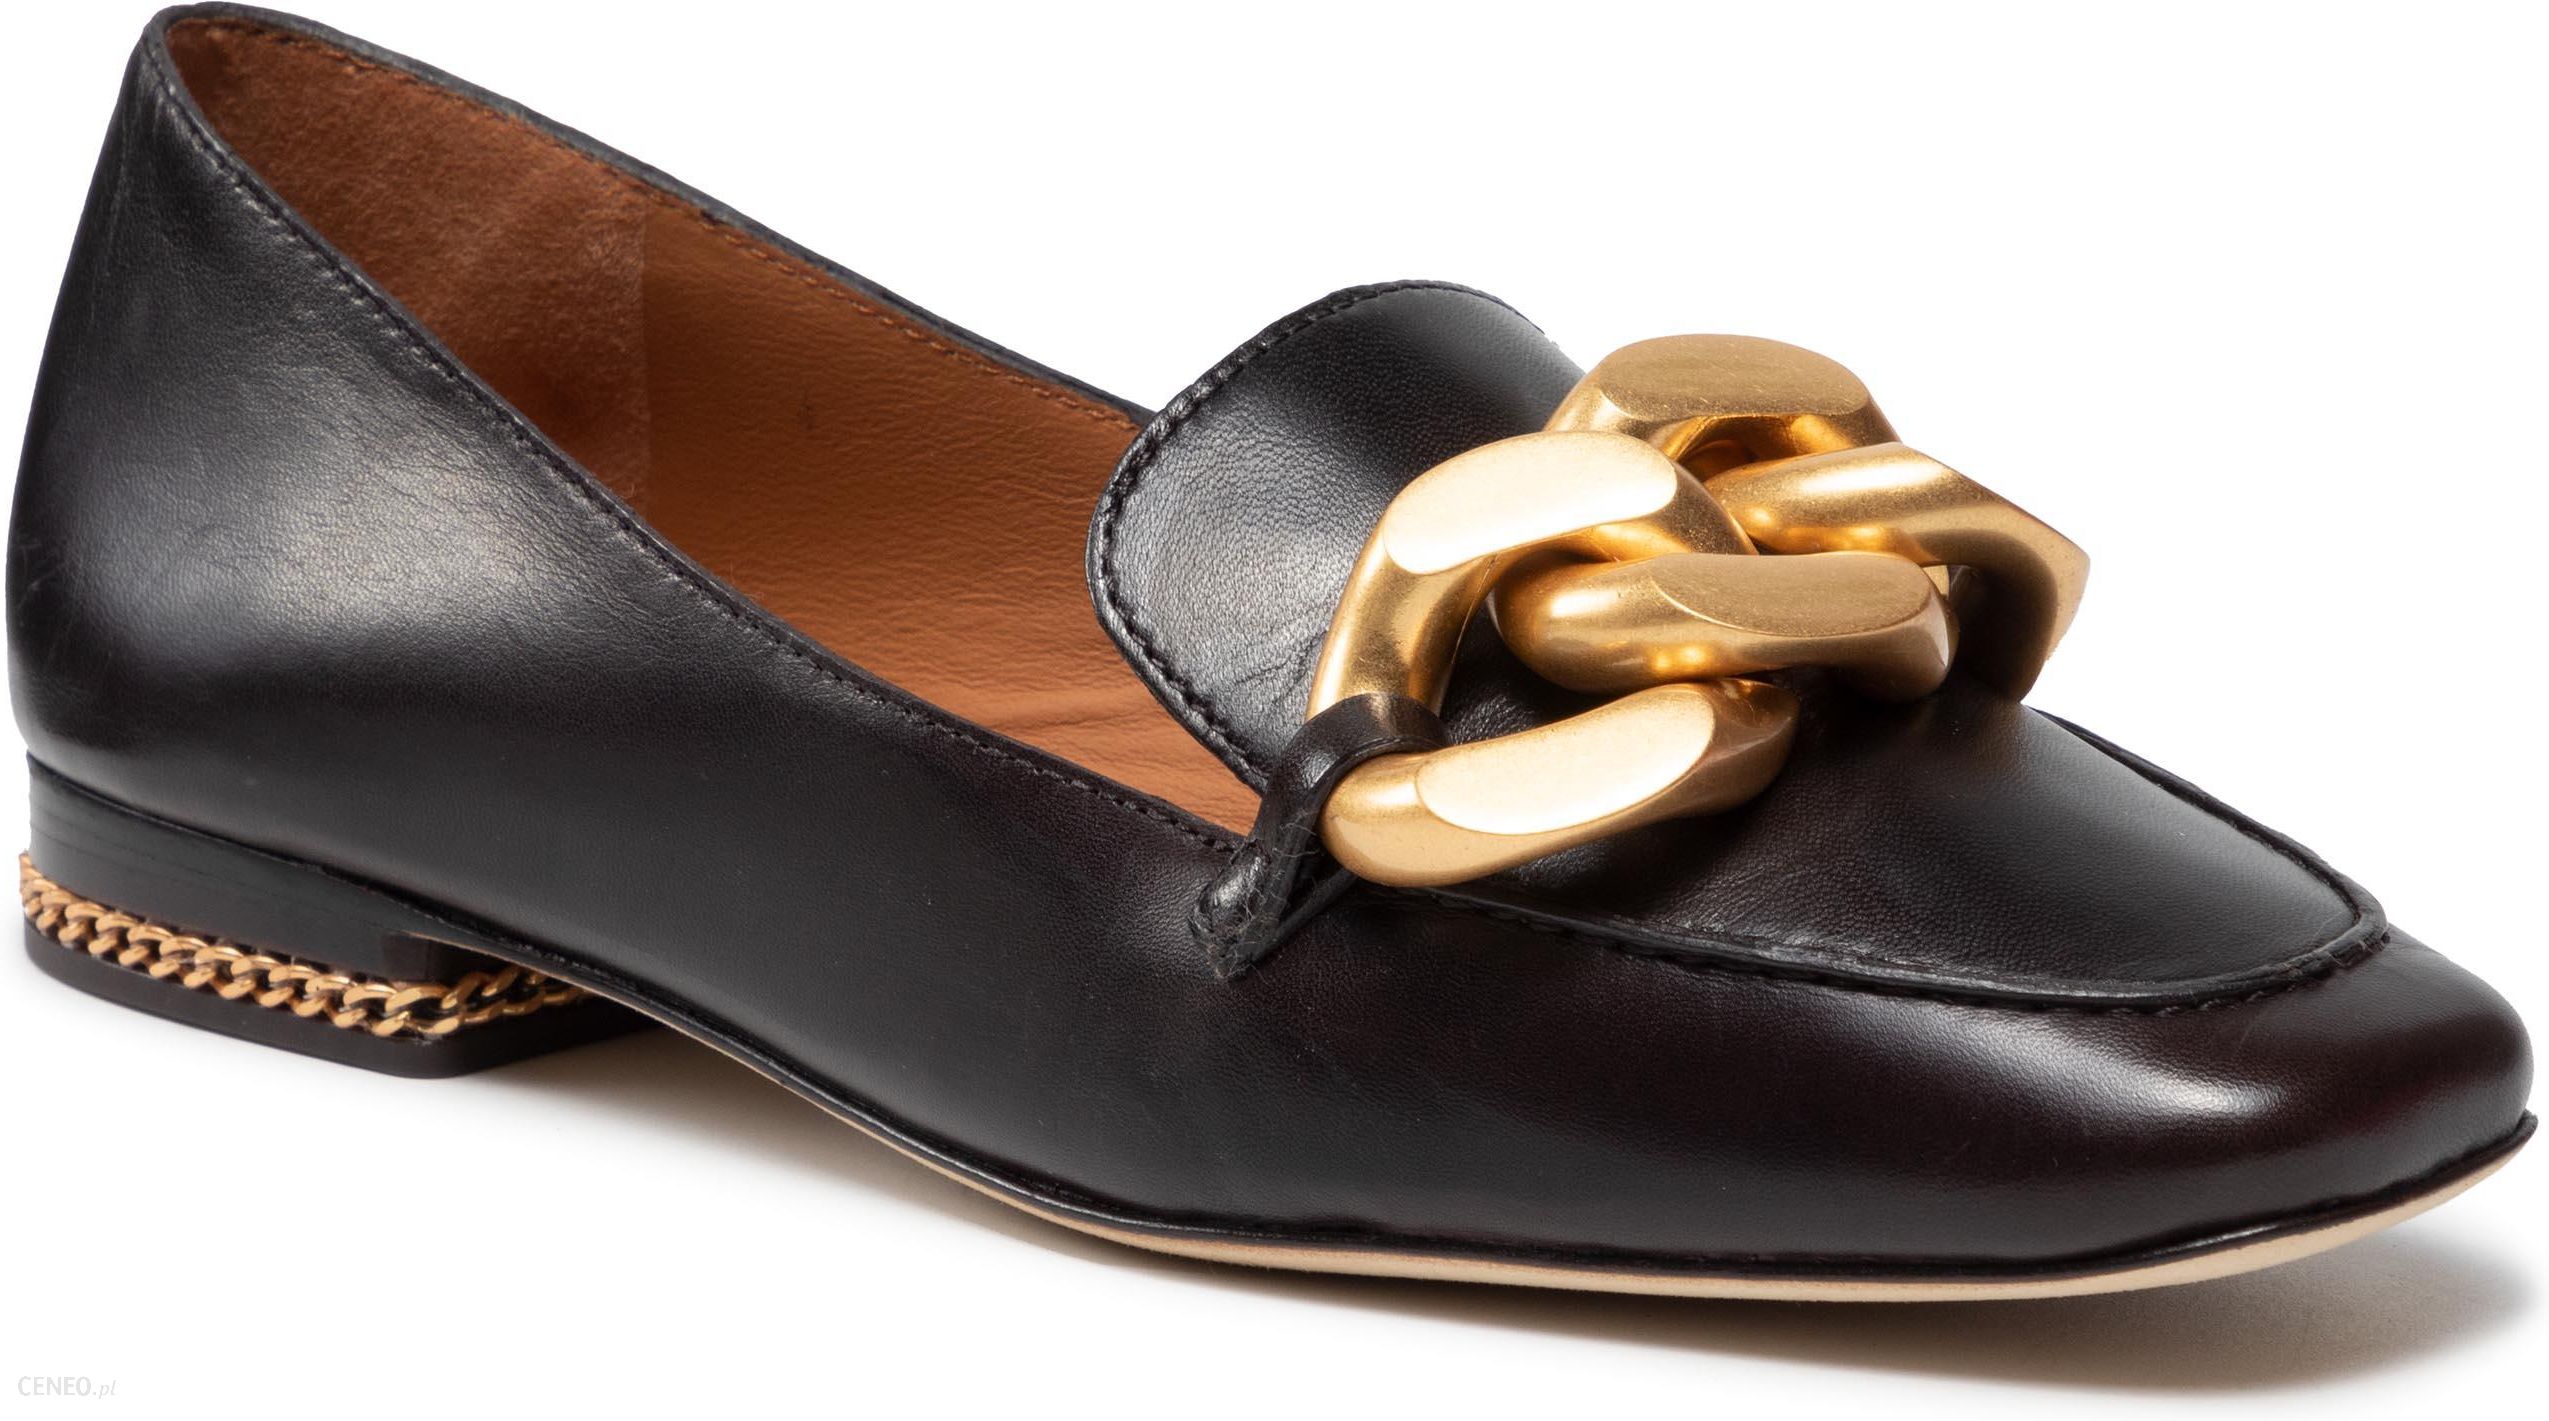 Lordsy TORY BURCH - Ruby Chain Loafer 86600 Chocolate Brown 200 - Ceny i  opinie 